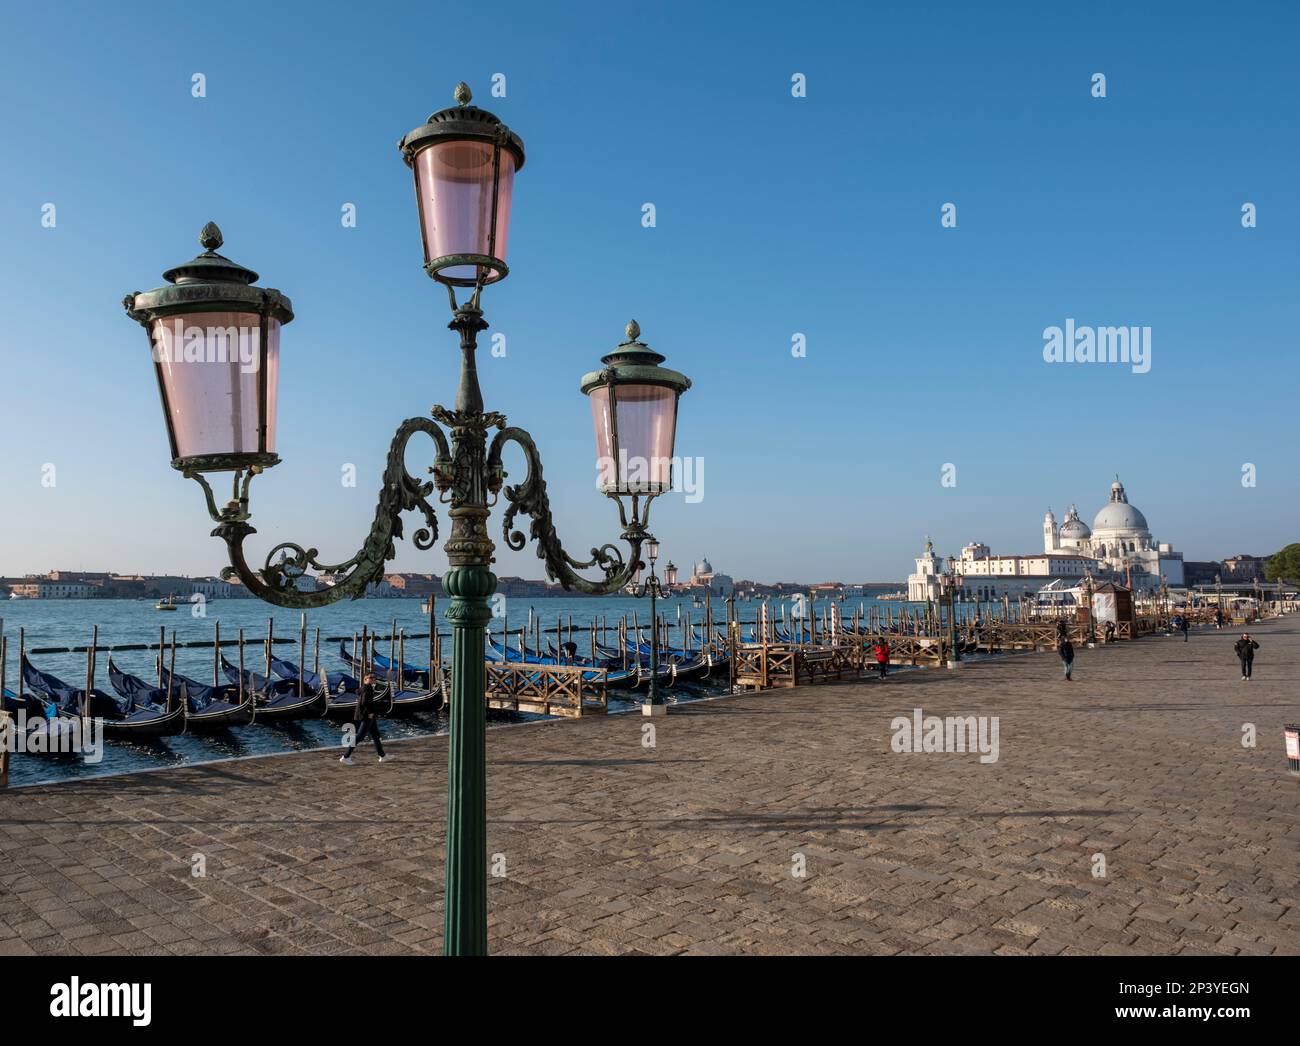 Canal embankment at Piazza San Marco, Venice, Italy. Stock Photo